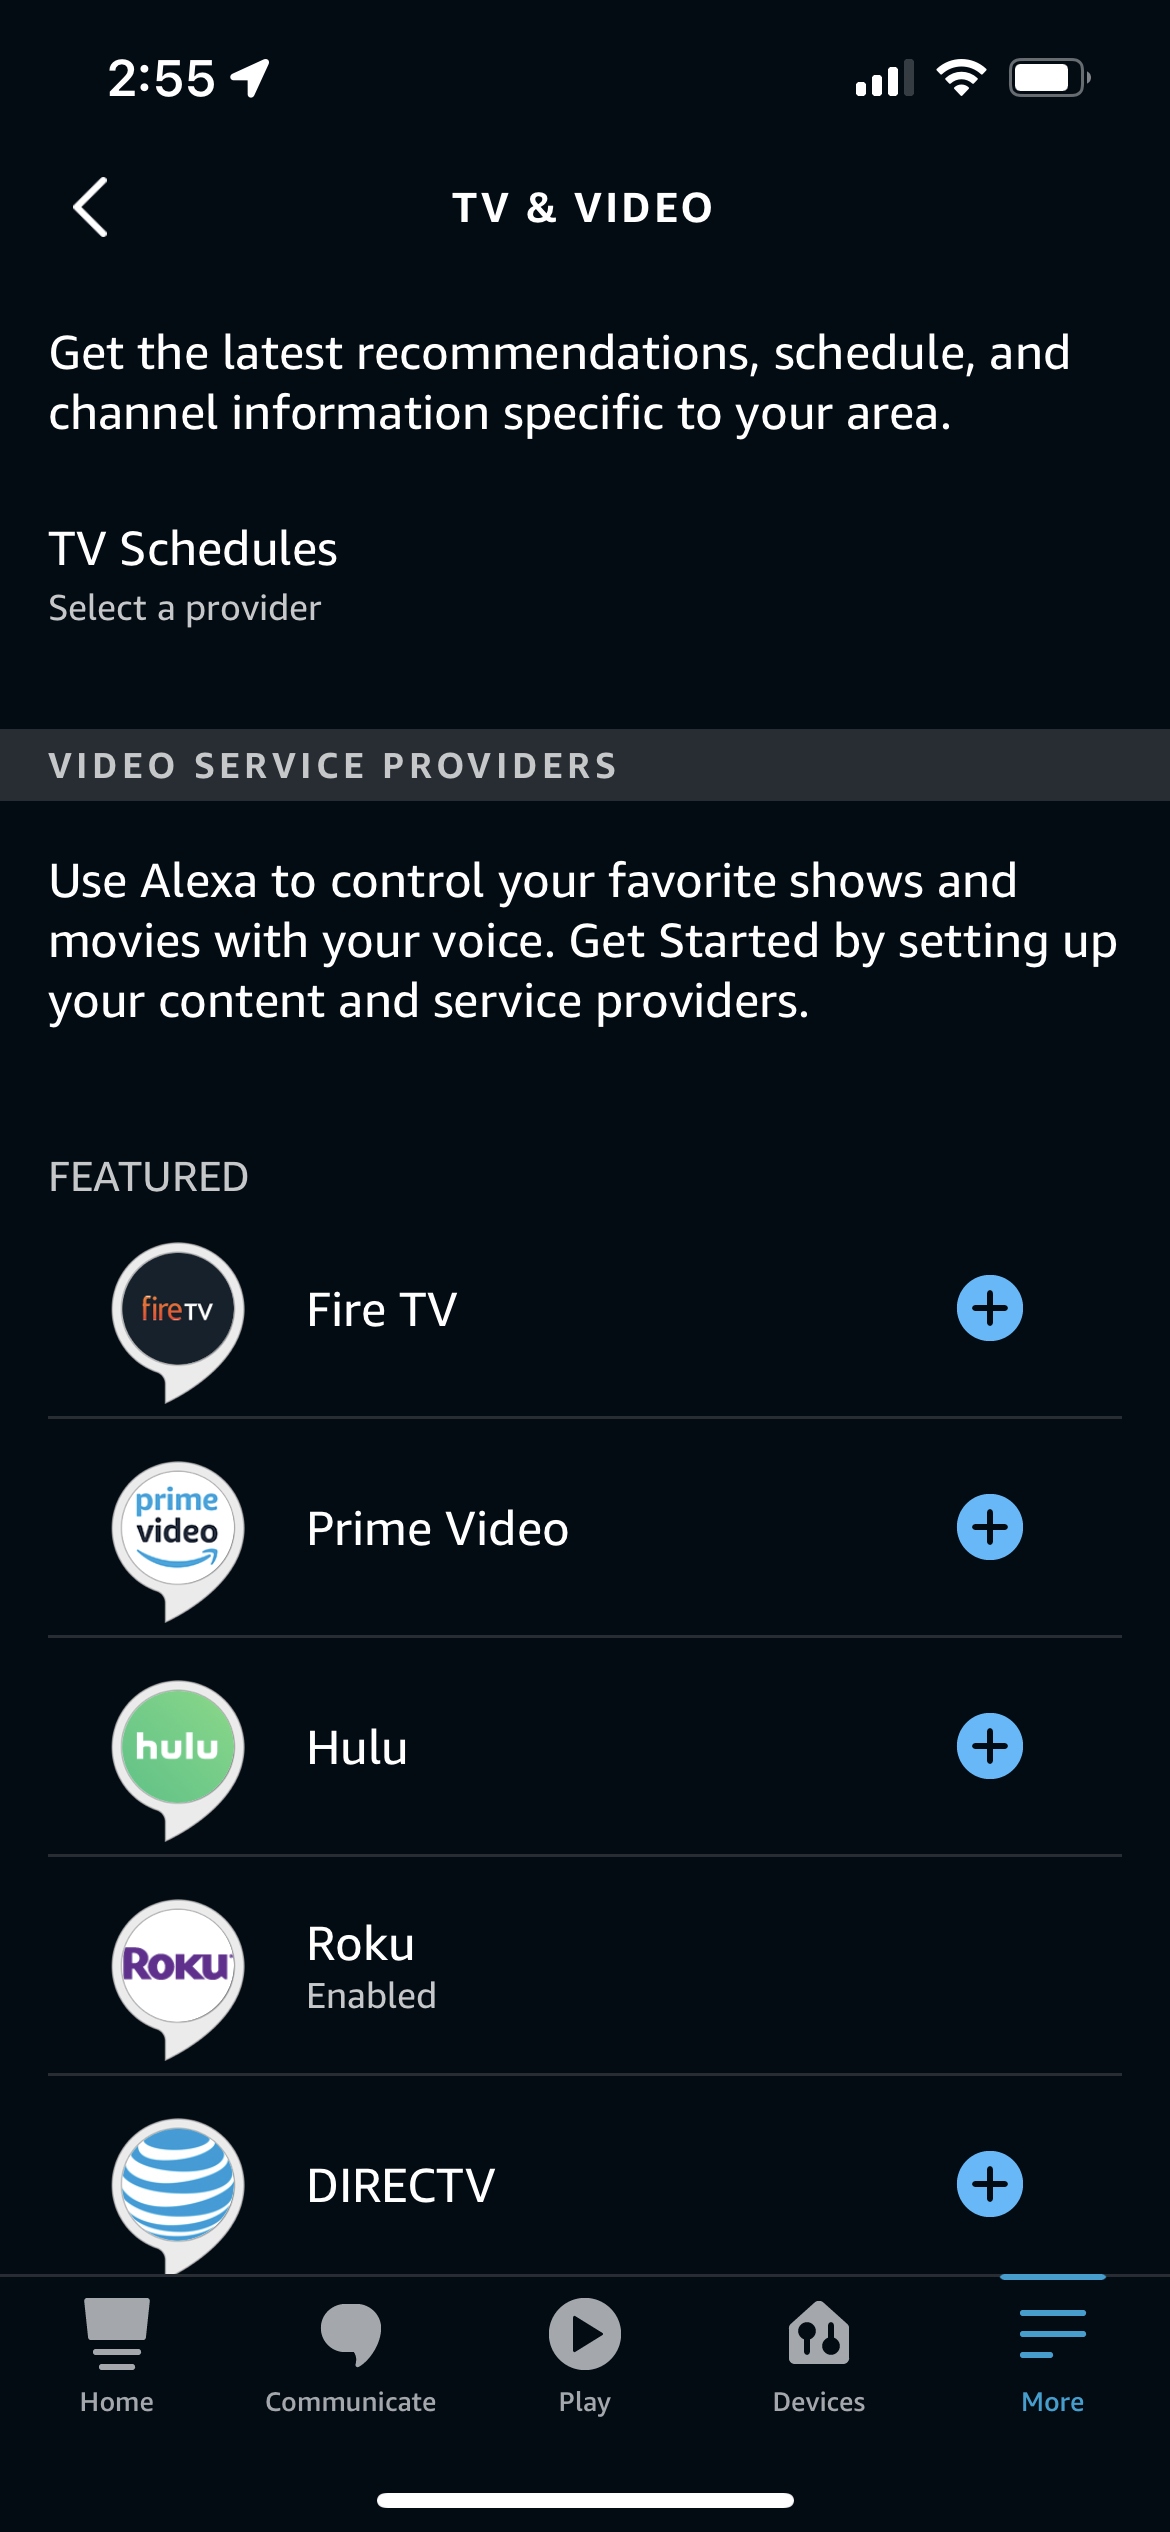 TV and video options in the Alexa app